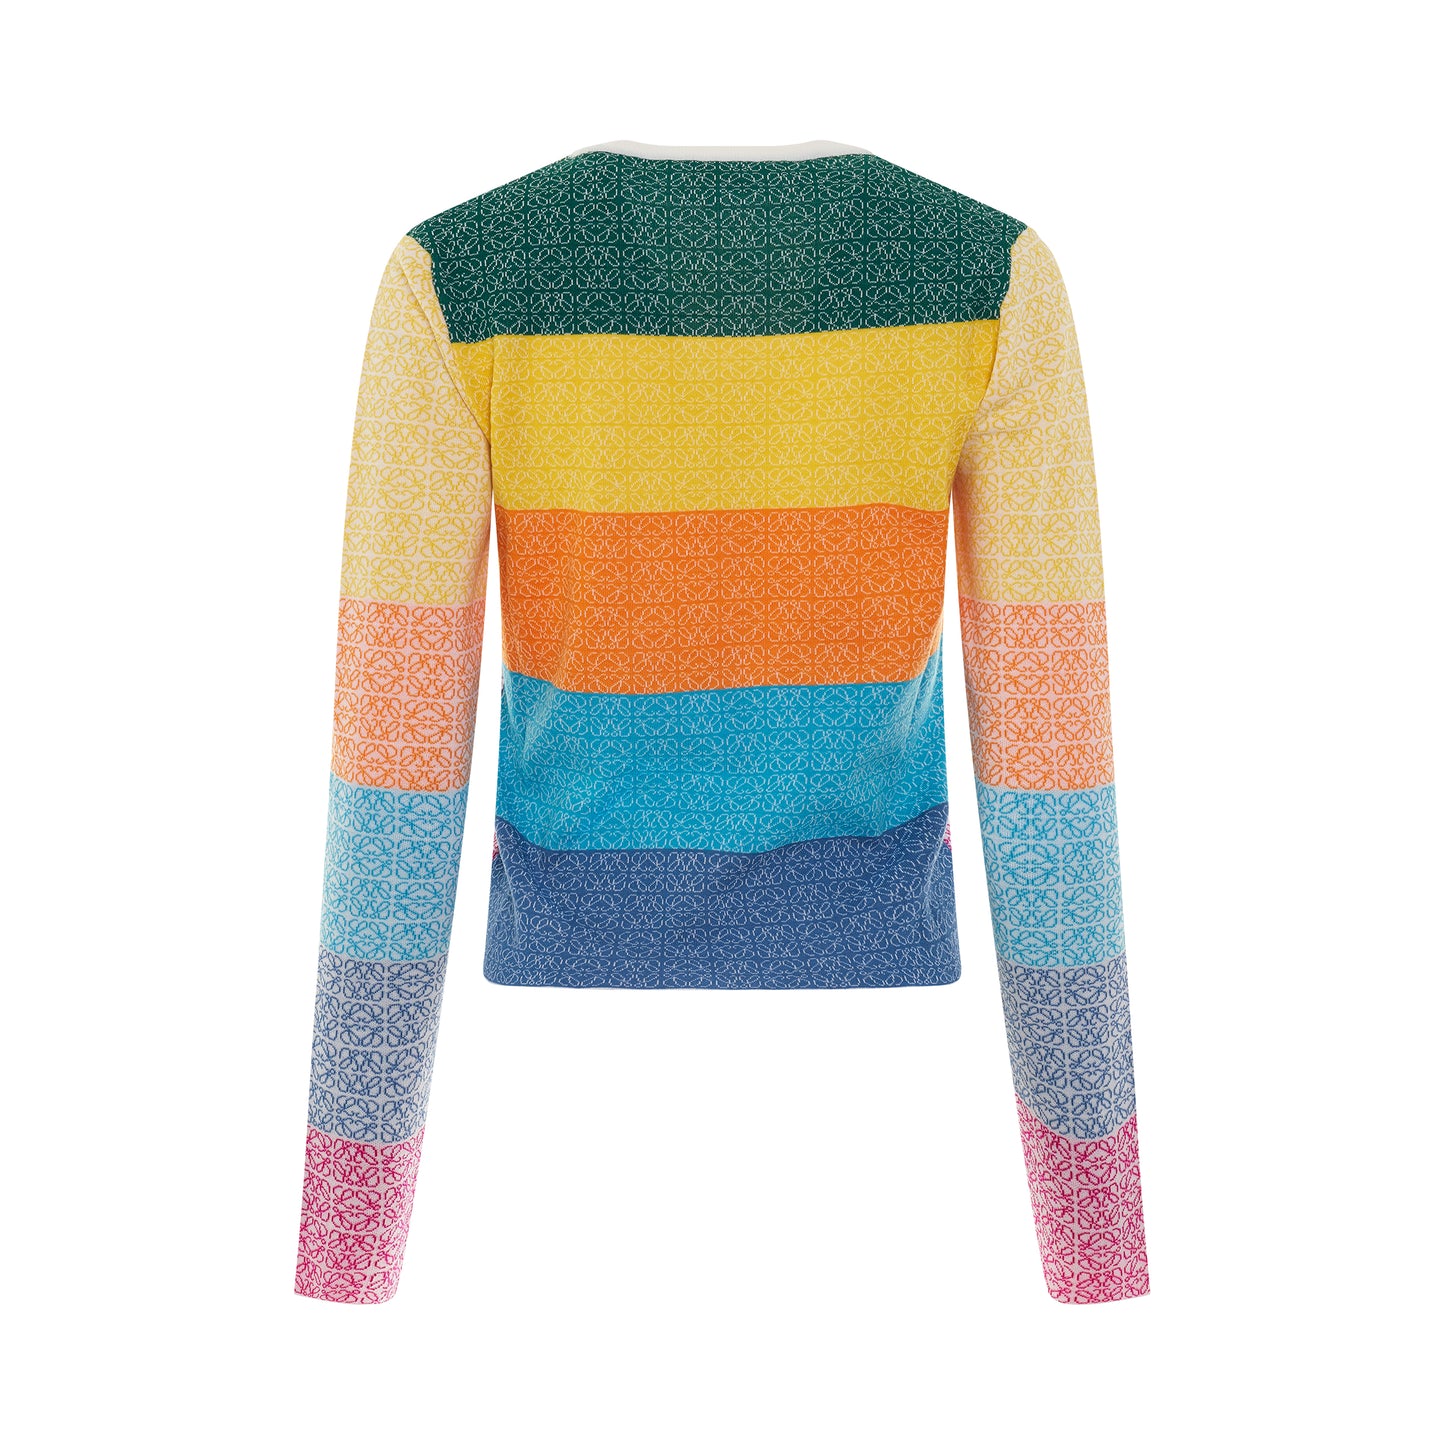 Anagram Jacquard Wool Sweater in Multicolour